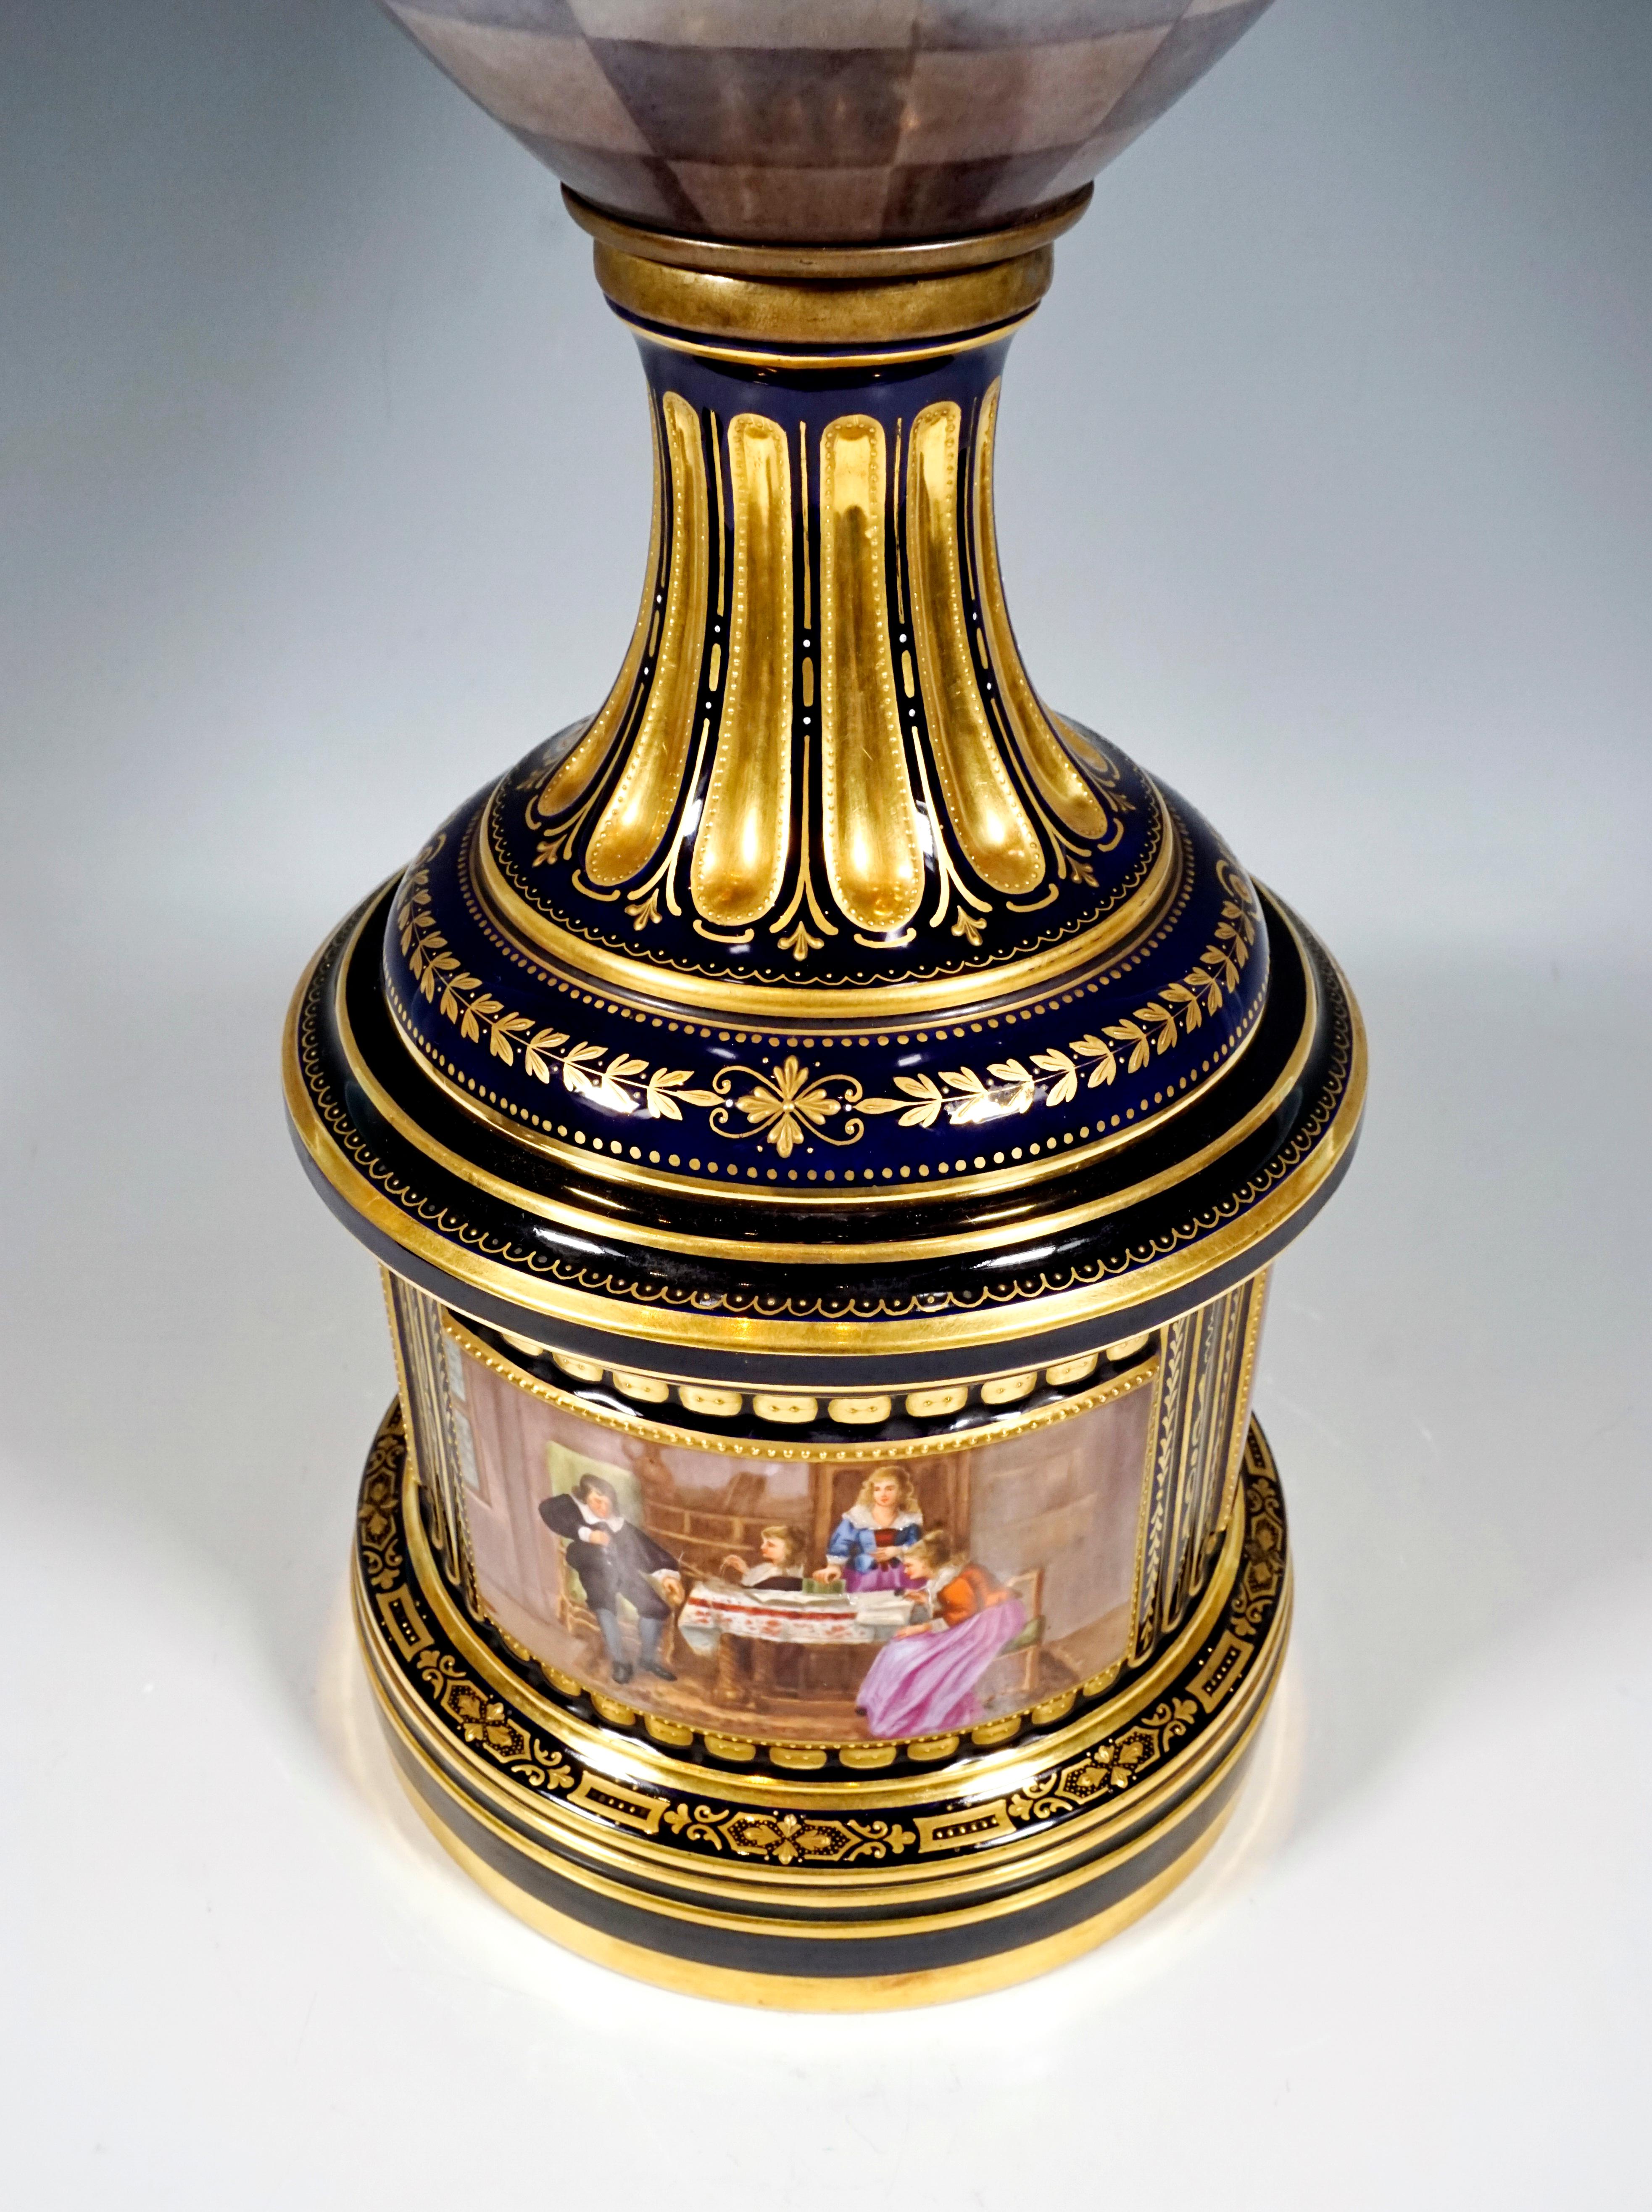 Hand-Painted High KPM Berlin Lidded Porcelain Vase with Colourfully Painted Scenery ca 1918